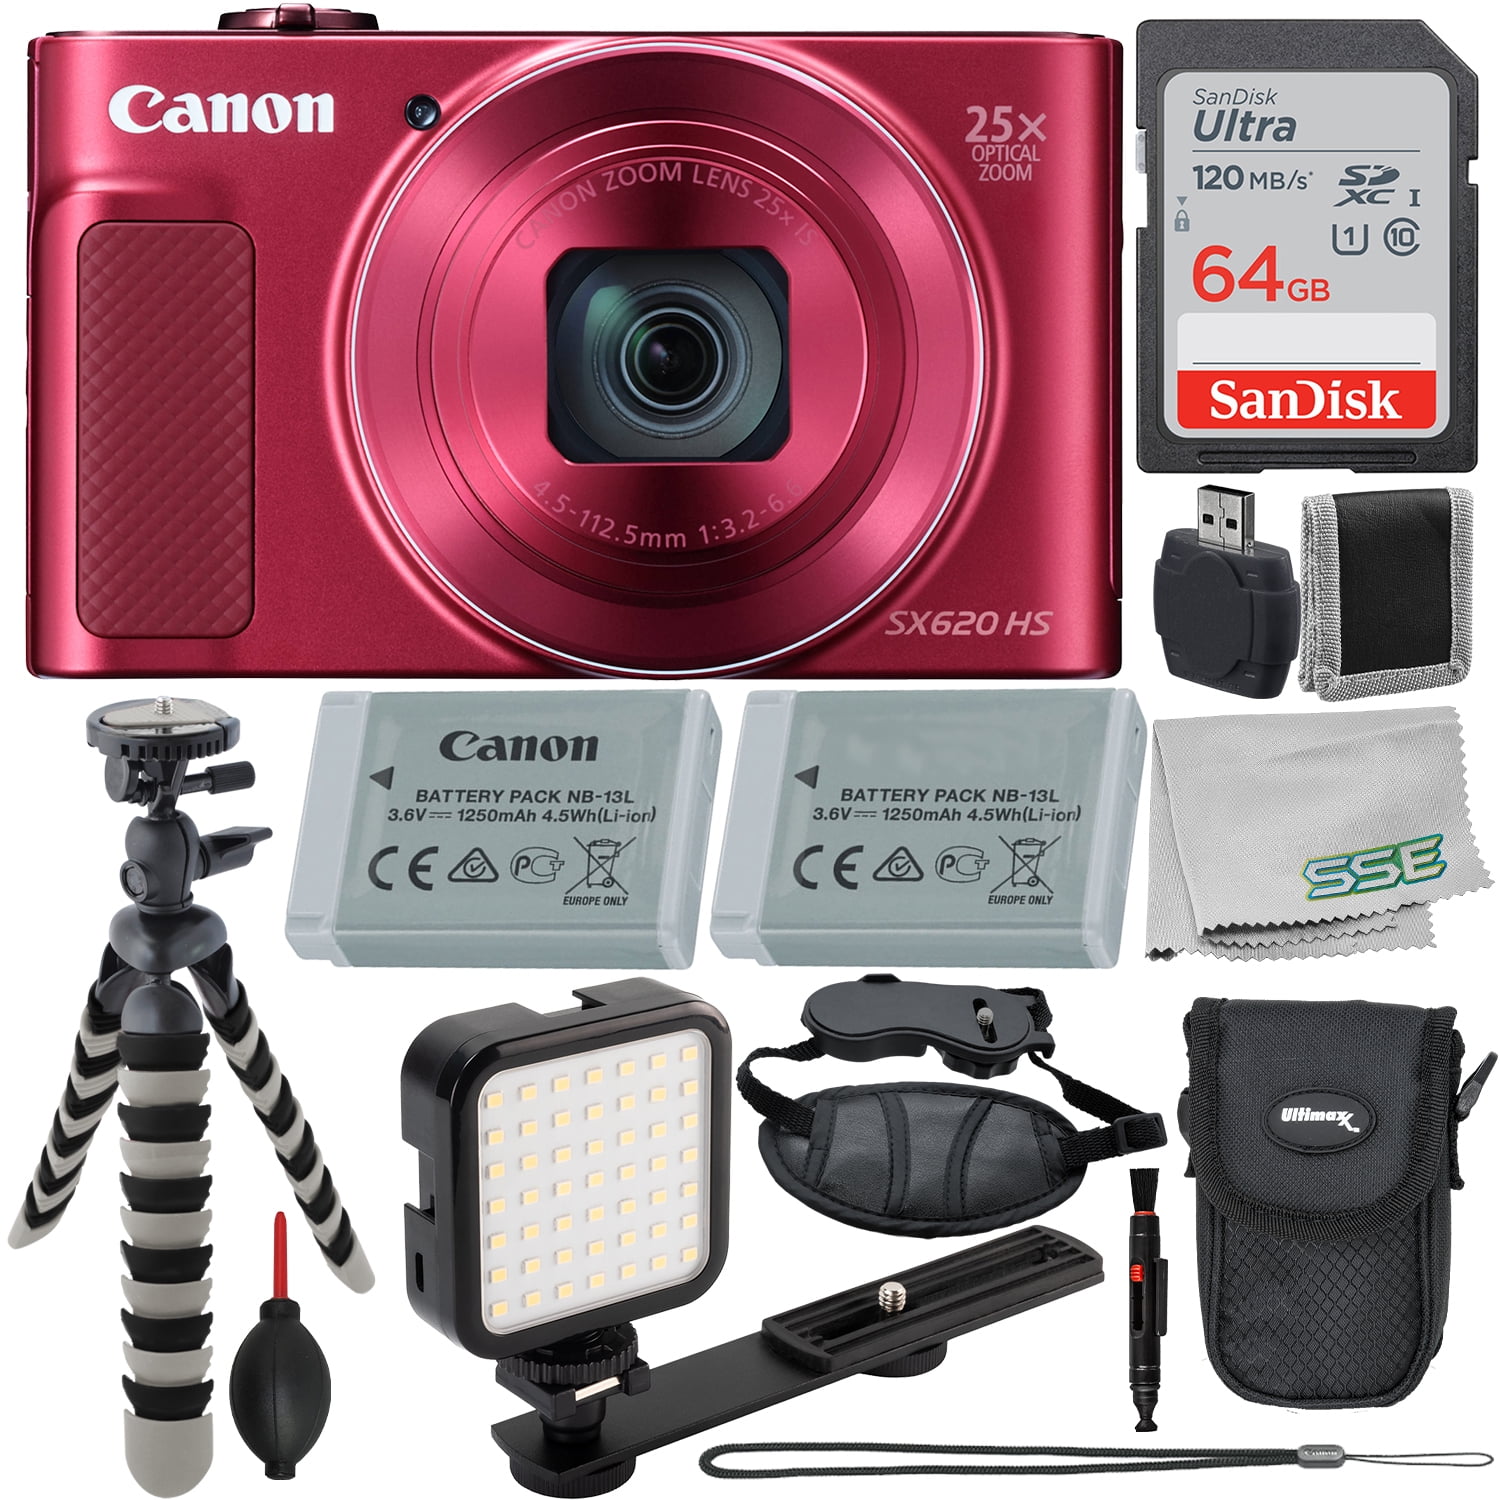 Philadelphia virtueel hoop Canon PowerShot SX620 HS Digital Camera (Red) with Advanced Accessory  Bundle: SanDisk 64GB Ultra Memory Card, Water-Resistant Point & Shoot Camera  Case & Much More (16pc Bundle) - Walmart.com